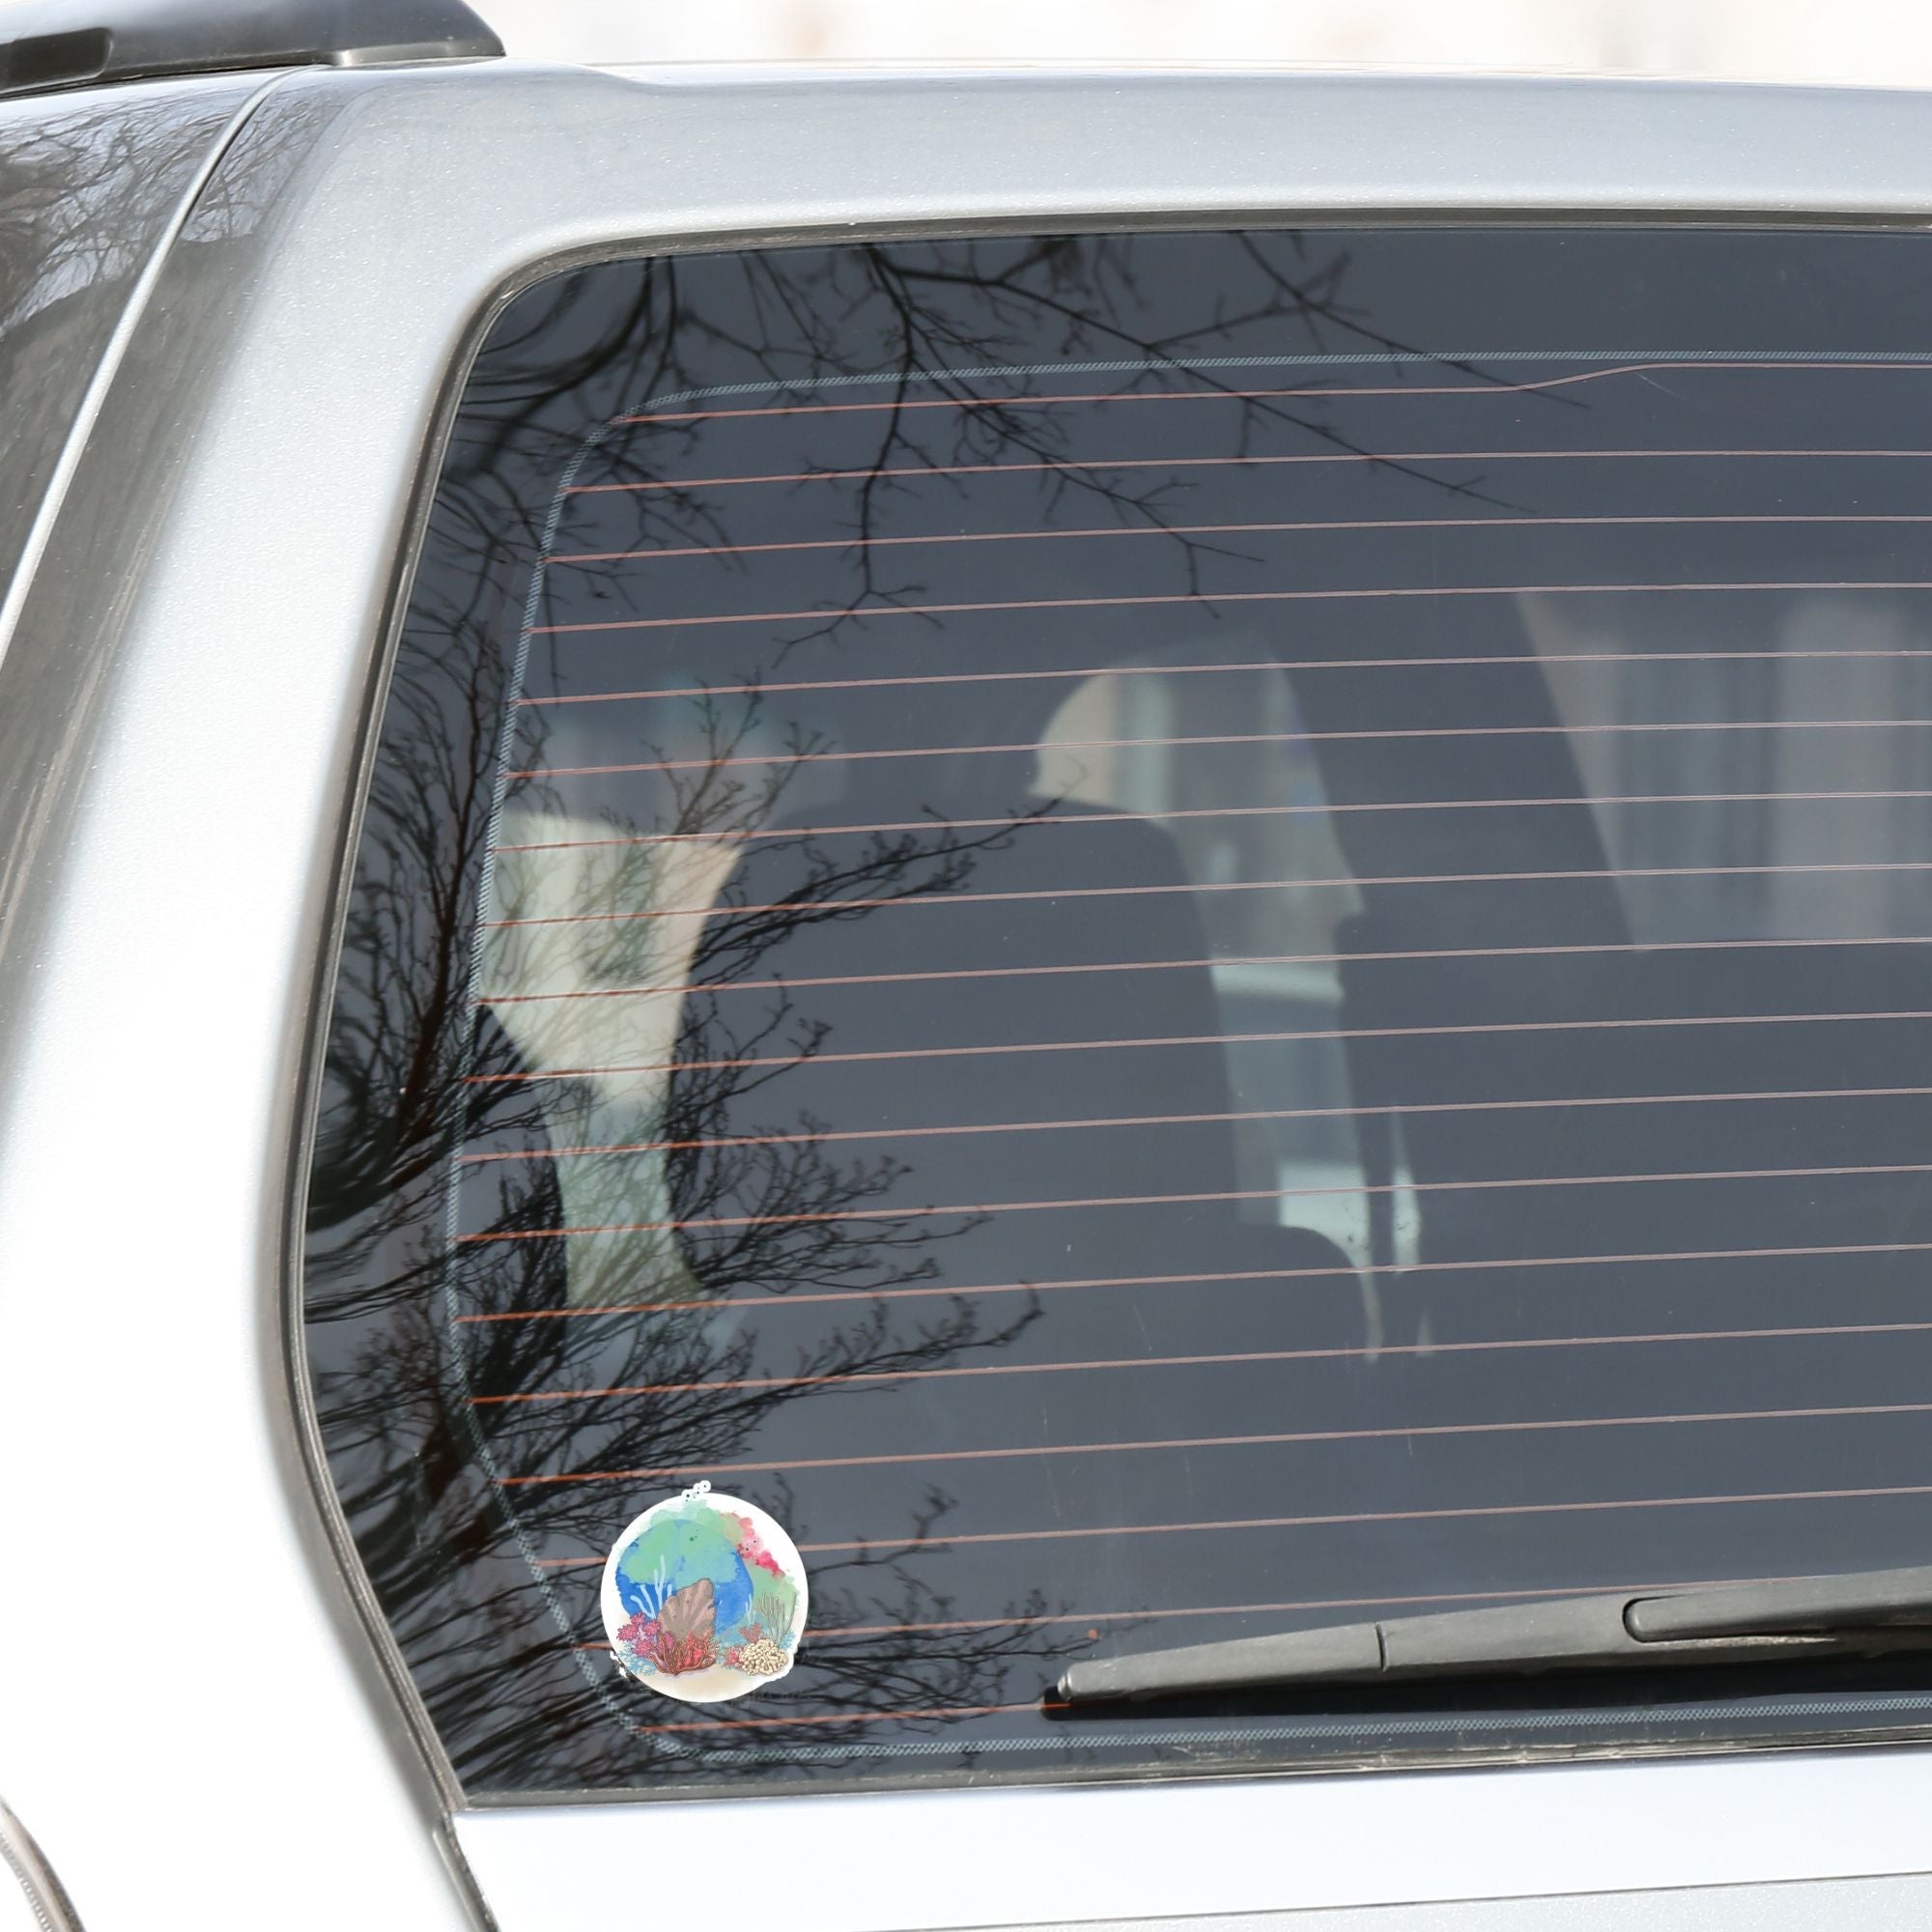 This underwater scene features corals, sand, and a pastel watercolor background on an individual die-cut sticker. With this sticker you can take the reef with you anywhere you go! This image shows the Watercolor Reef die-cut sticker on the back window of a car.